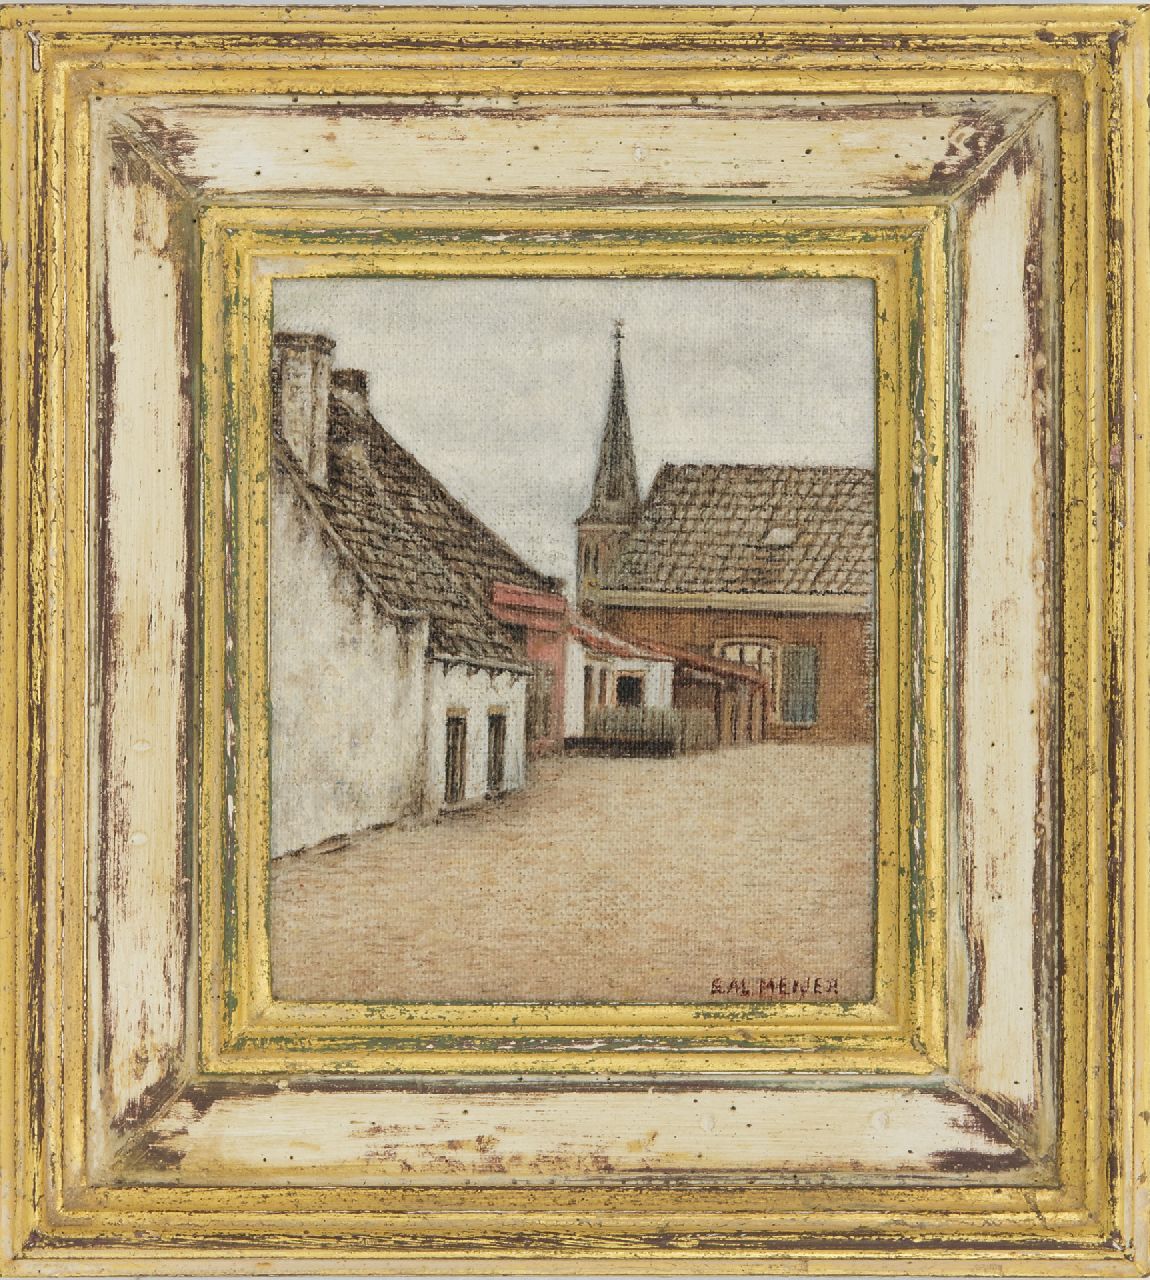 Meijer S.  | Salomon 'Sal' Meijer | Paintings offered for sale | A village view (possibly Zandvoort), oil on canvas laid down on board 14.5 x 11.3 cm, signed l.r.